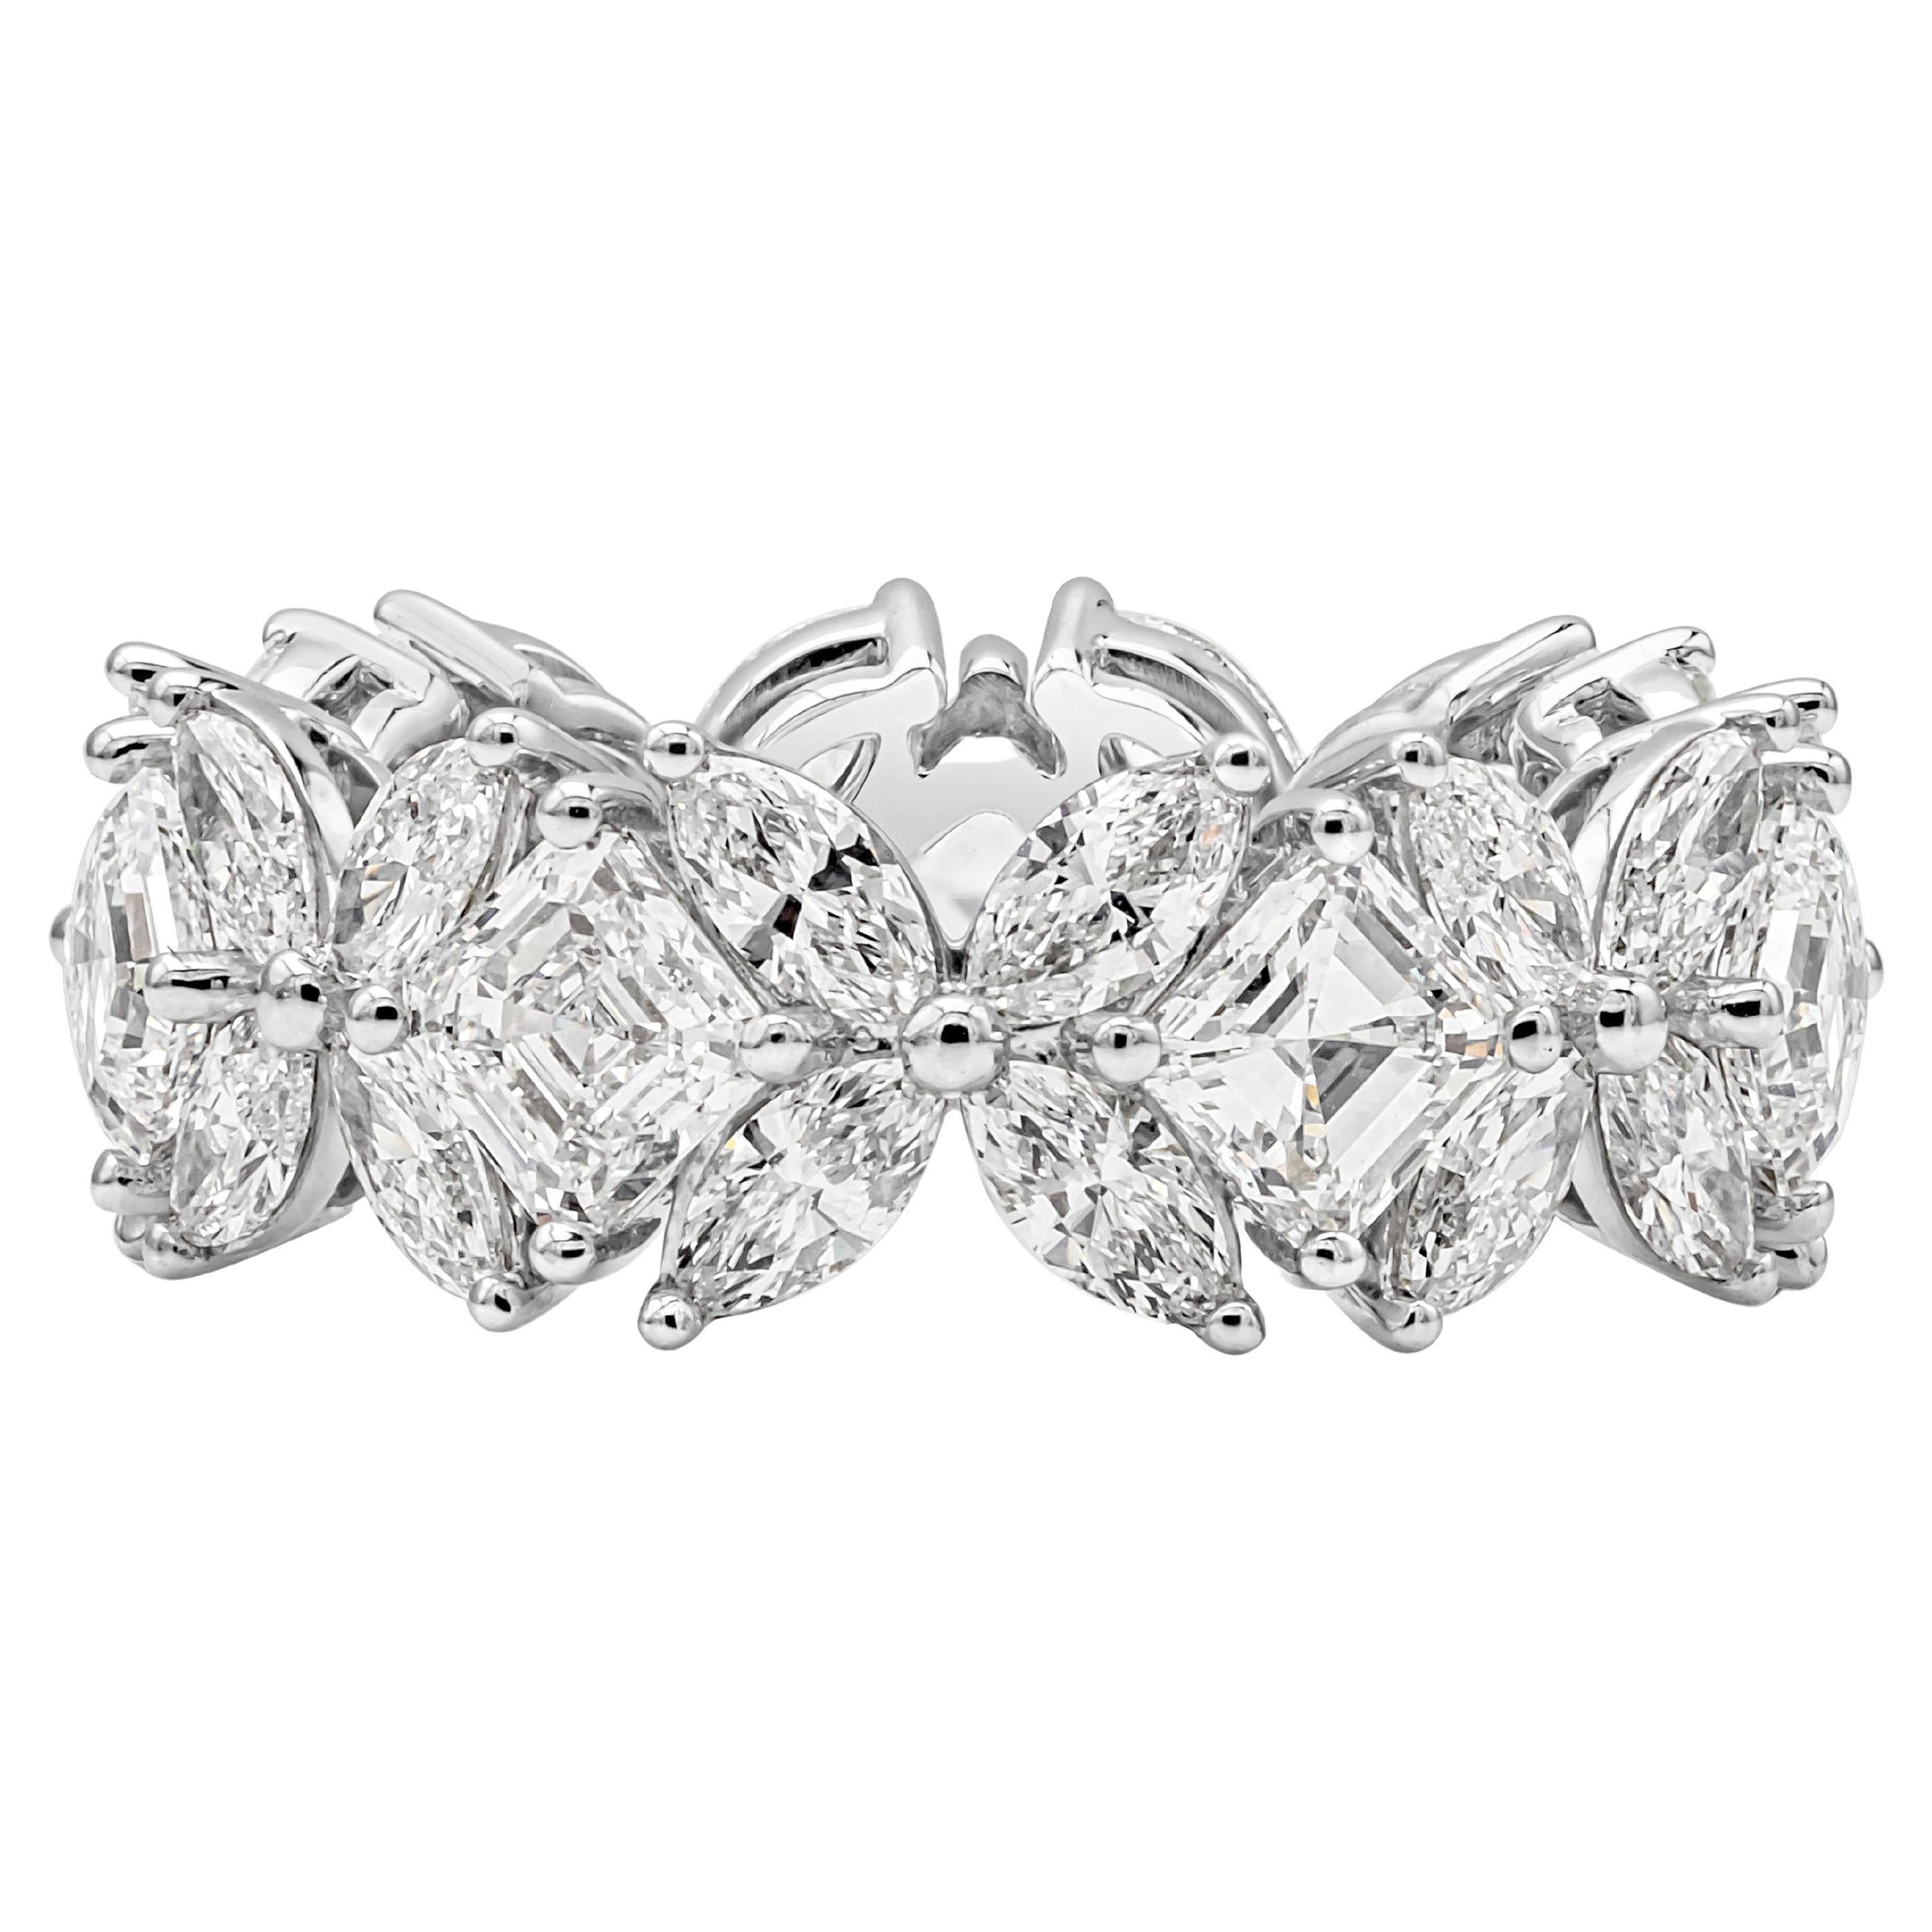 5.74 Carats Total Marquise and Asscher Cut Diamond Flower Eternity Band